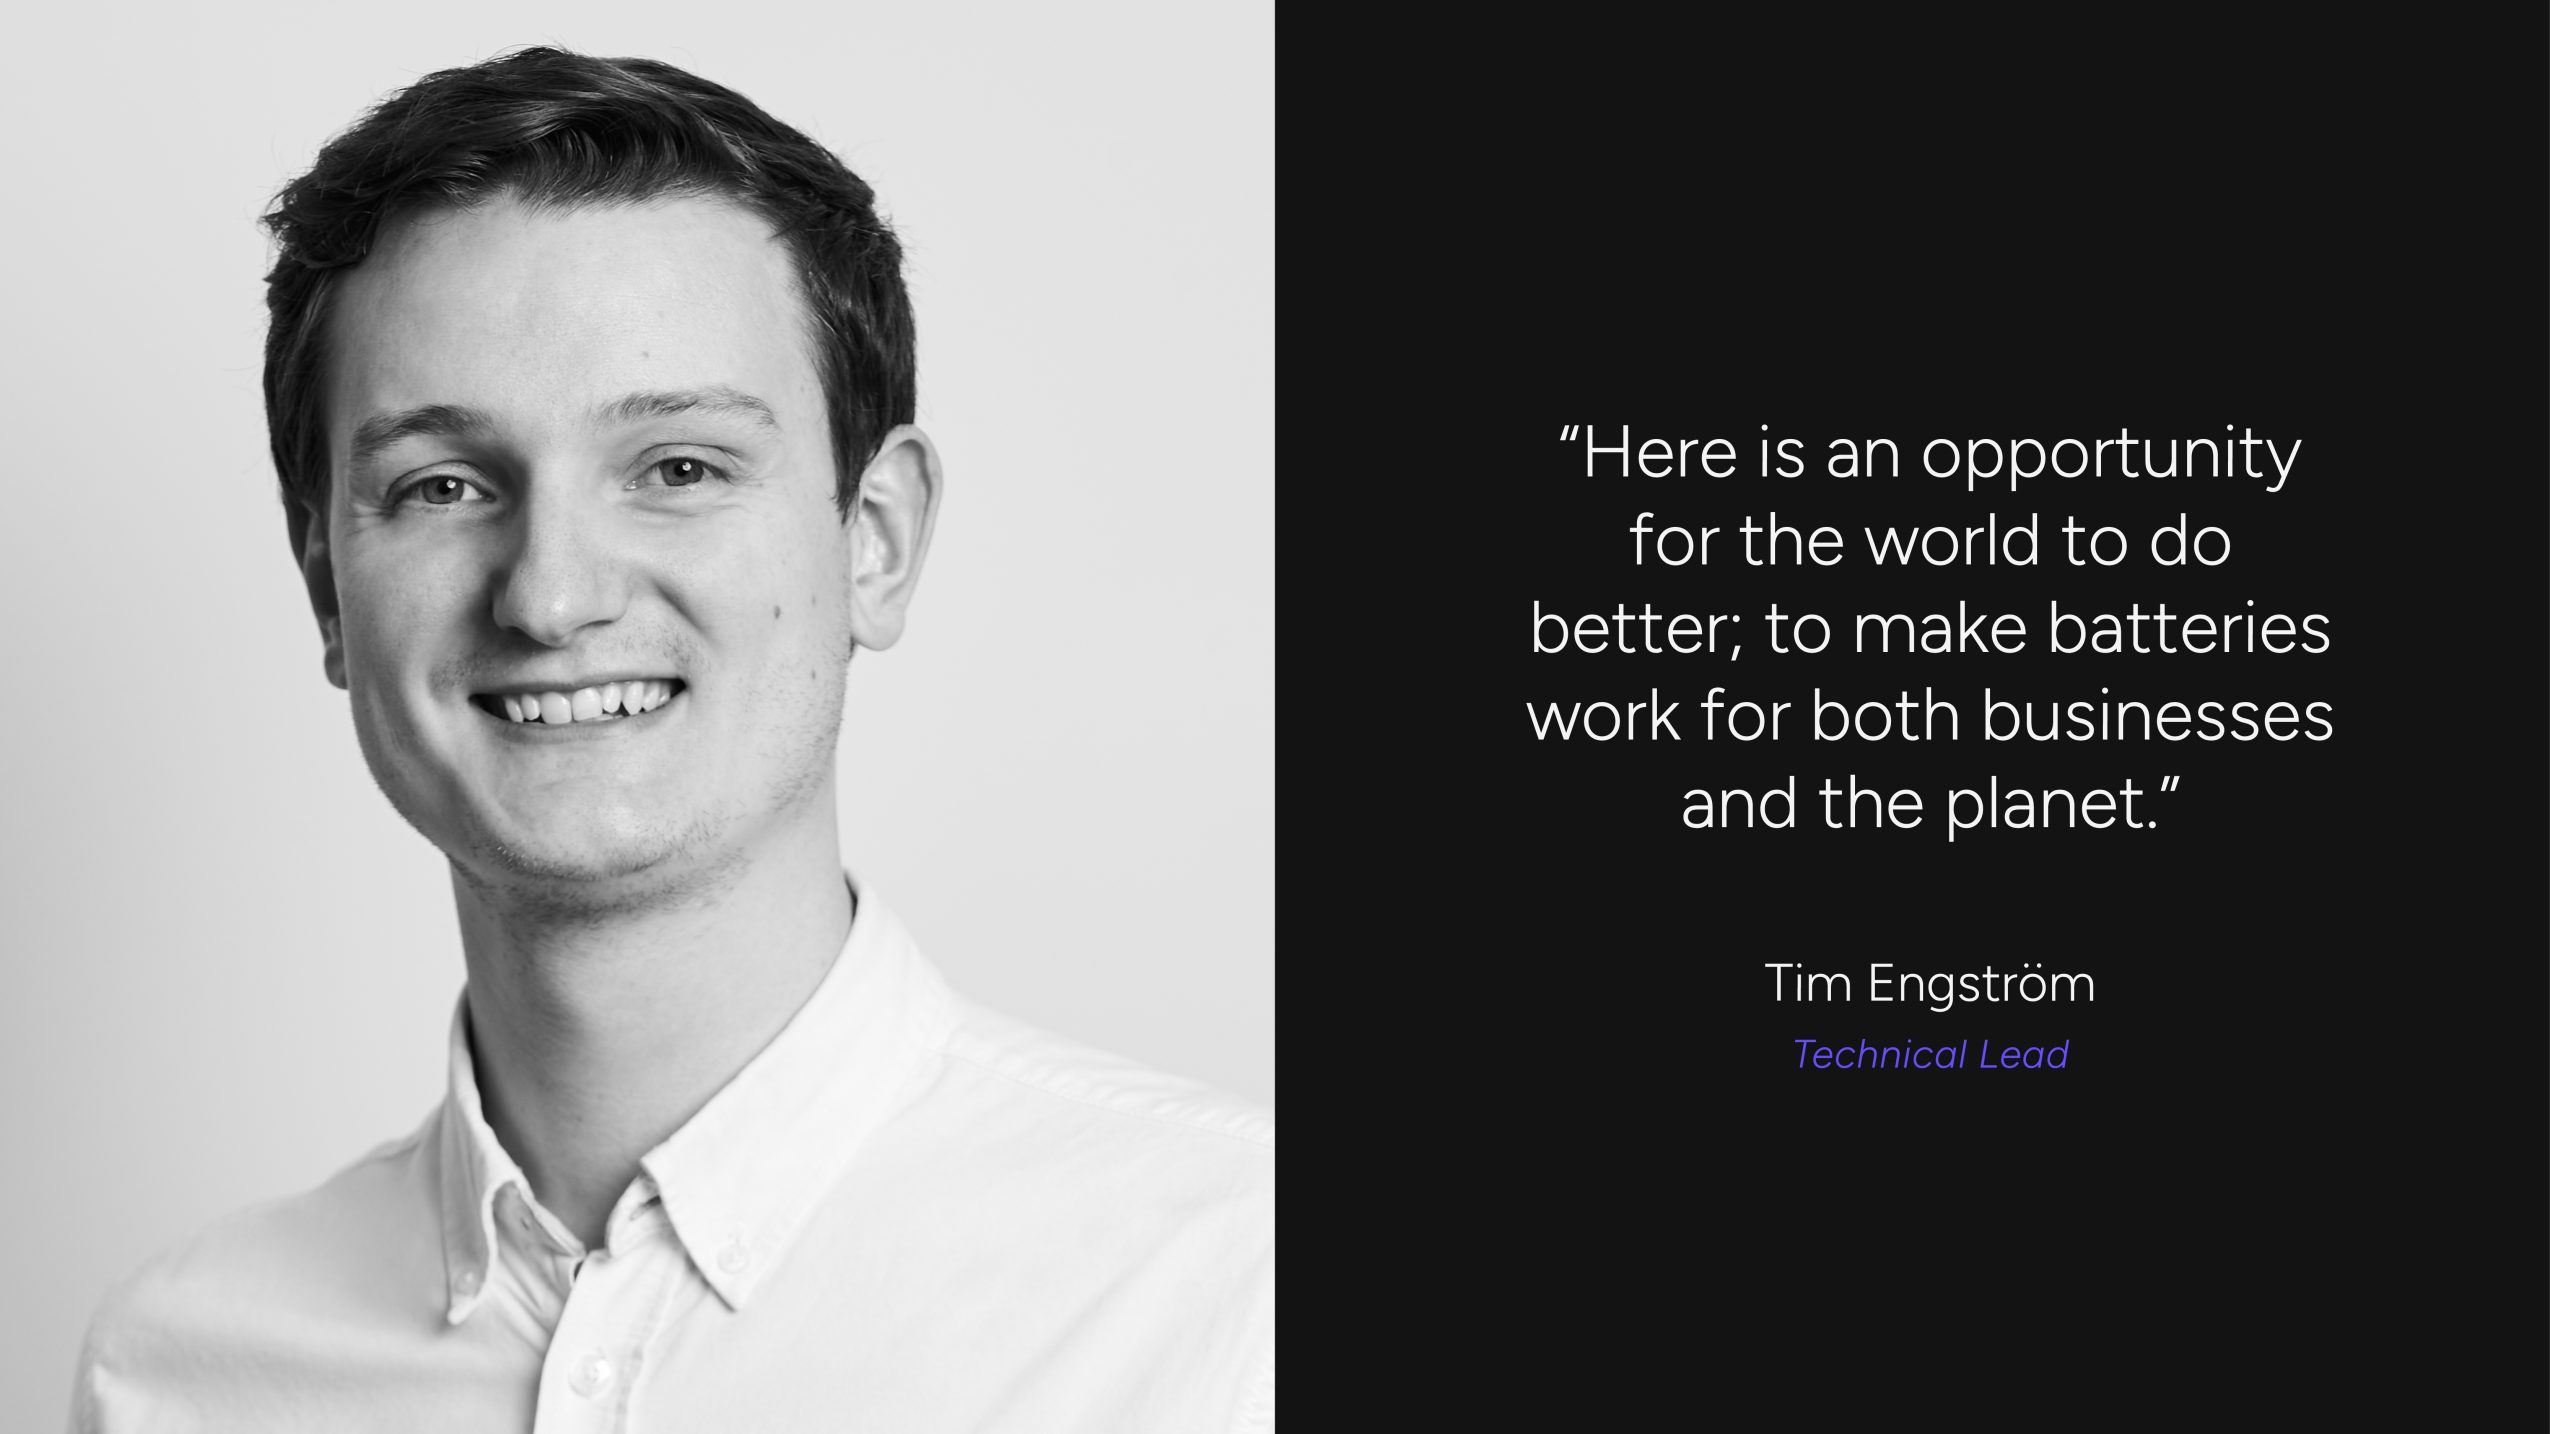 Image of Timothy Engstrom, Technical Lead alongside his quoted text 'Here is an opportunity for the world to do better; to make batteries work for both businesses and the planet'